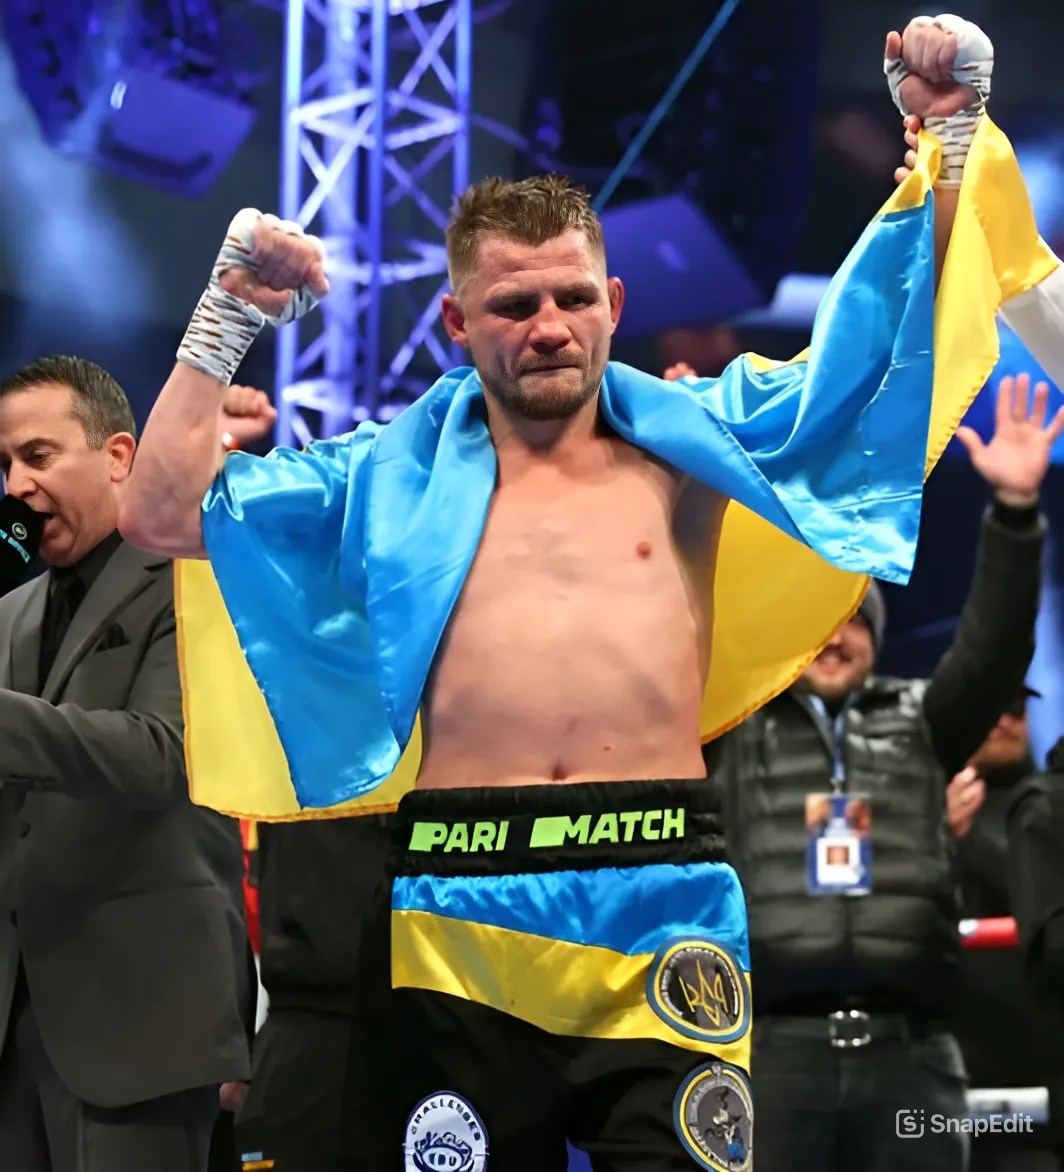 🥊 Boxer Denys Berinchyk won the WBO lightweight championship belt by defeating Emanuel Navarrete by decision Congratulations and incredibly proud! 🇺🇦